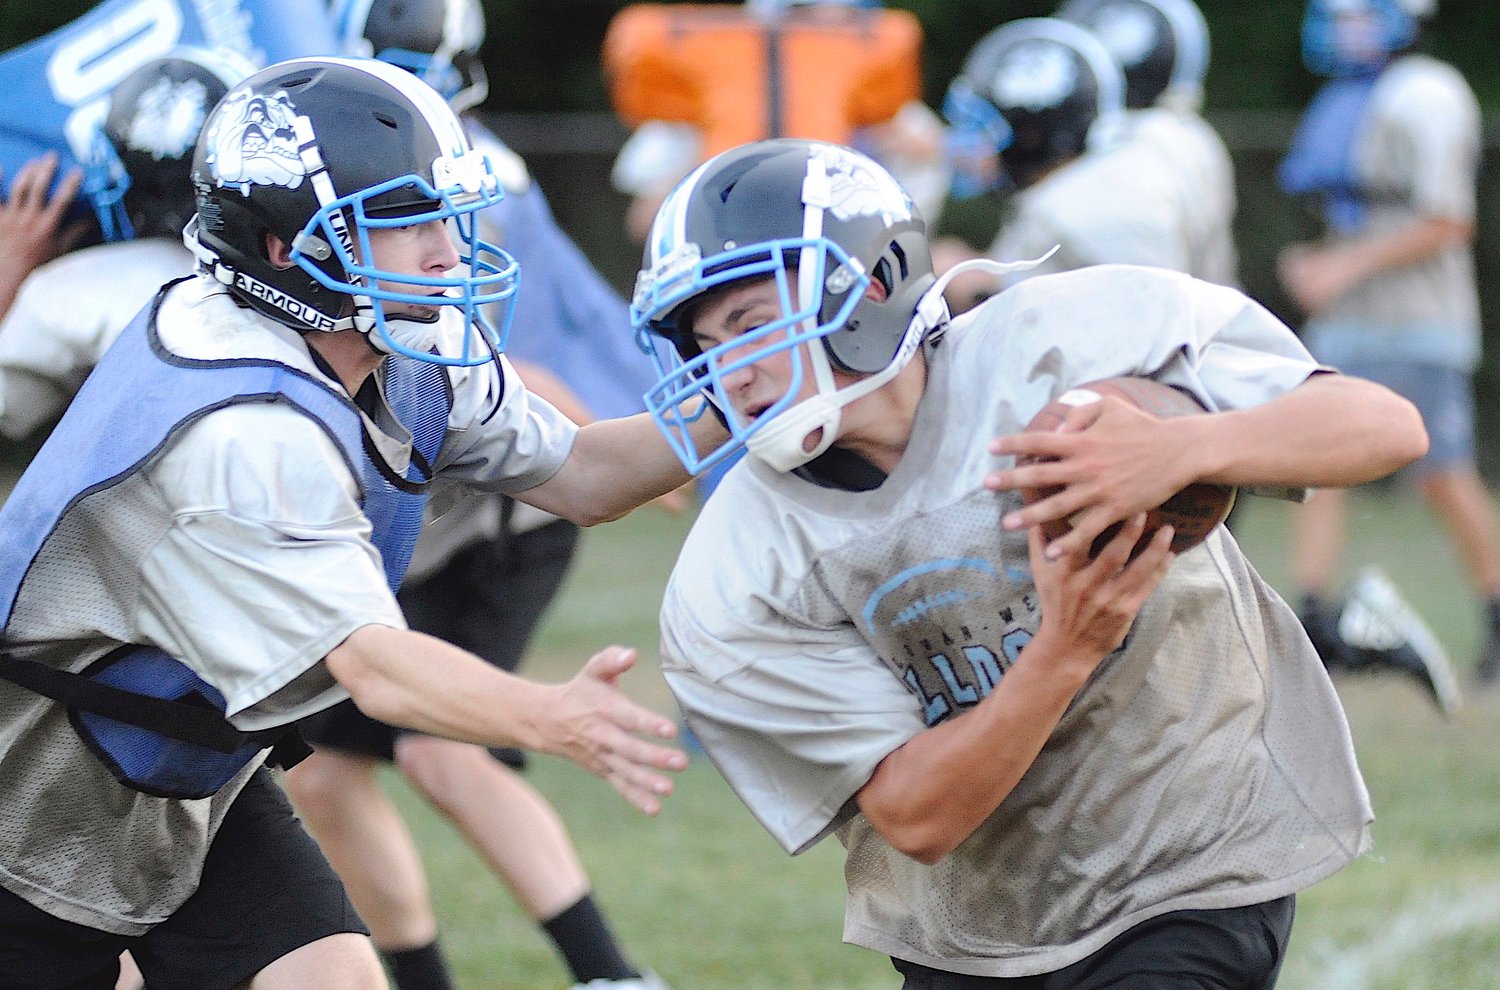 Cutting through the defense. Ball-carrier Jason Rodriguez, a sophomore, is challenged at the line by fellow tenth-grader Adam Ernst in the blue pinnie.